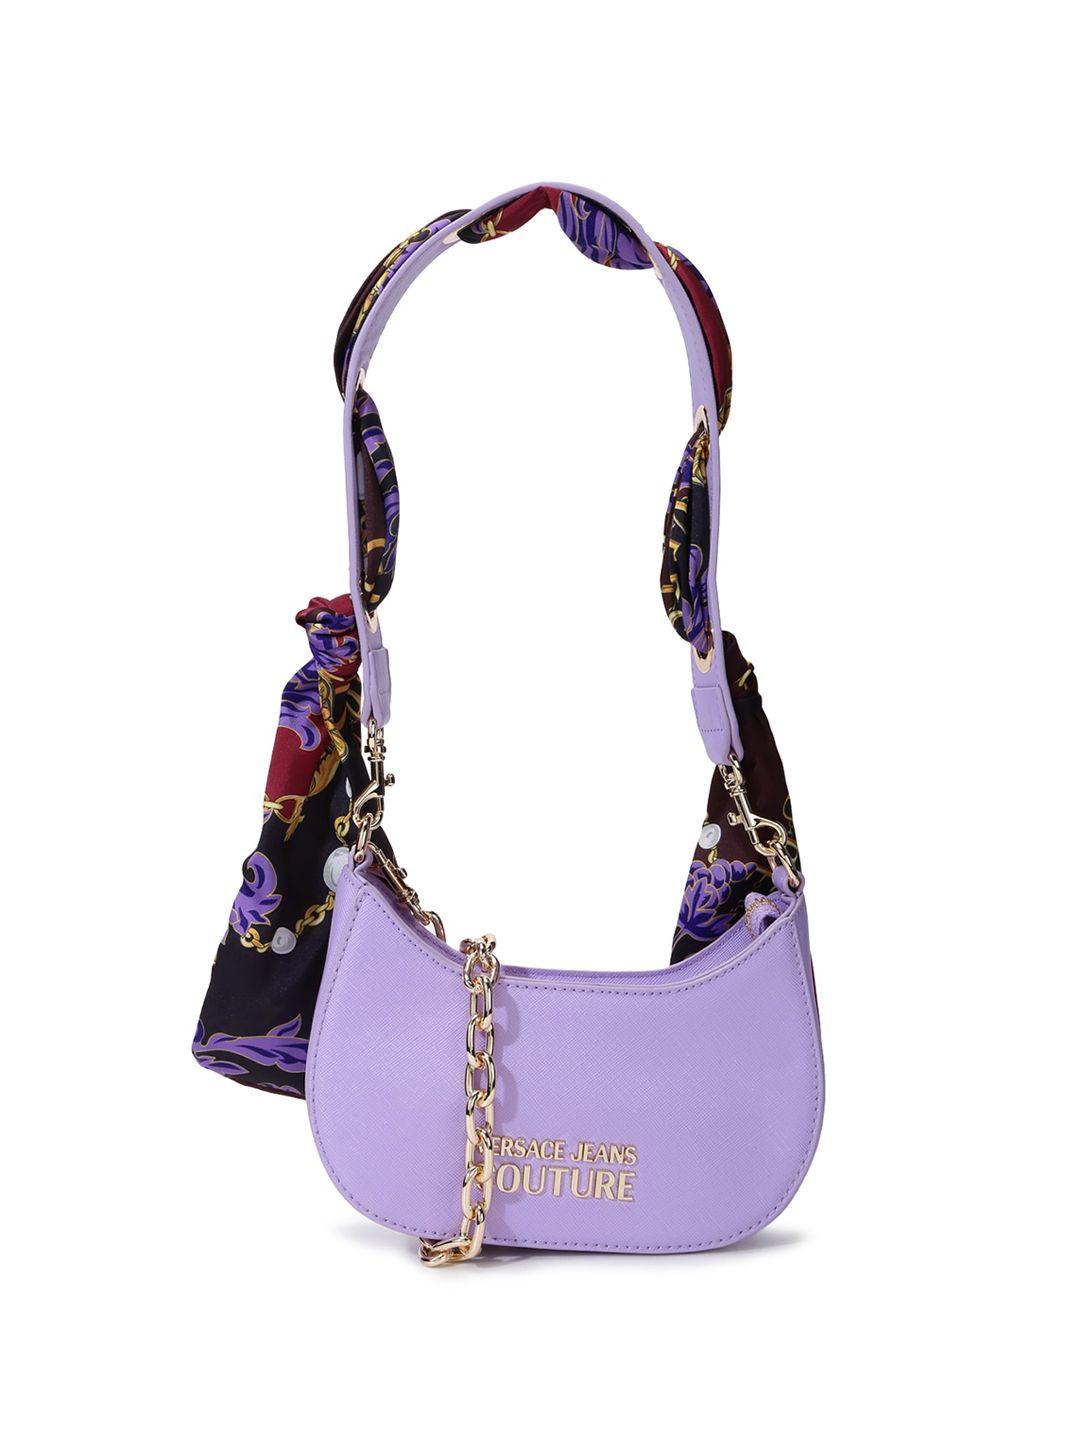 versace jeans couture leather structured shoulder bag